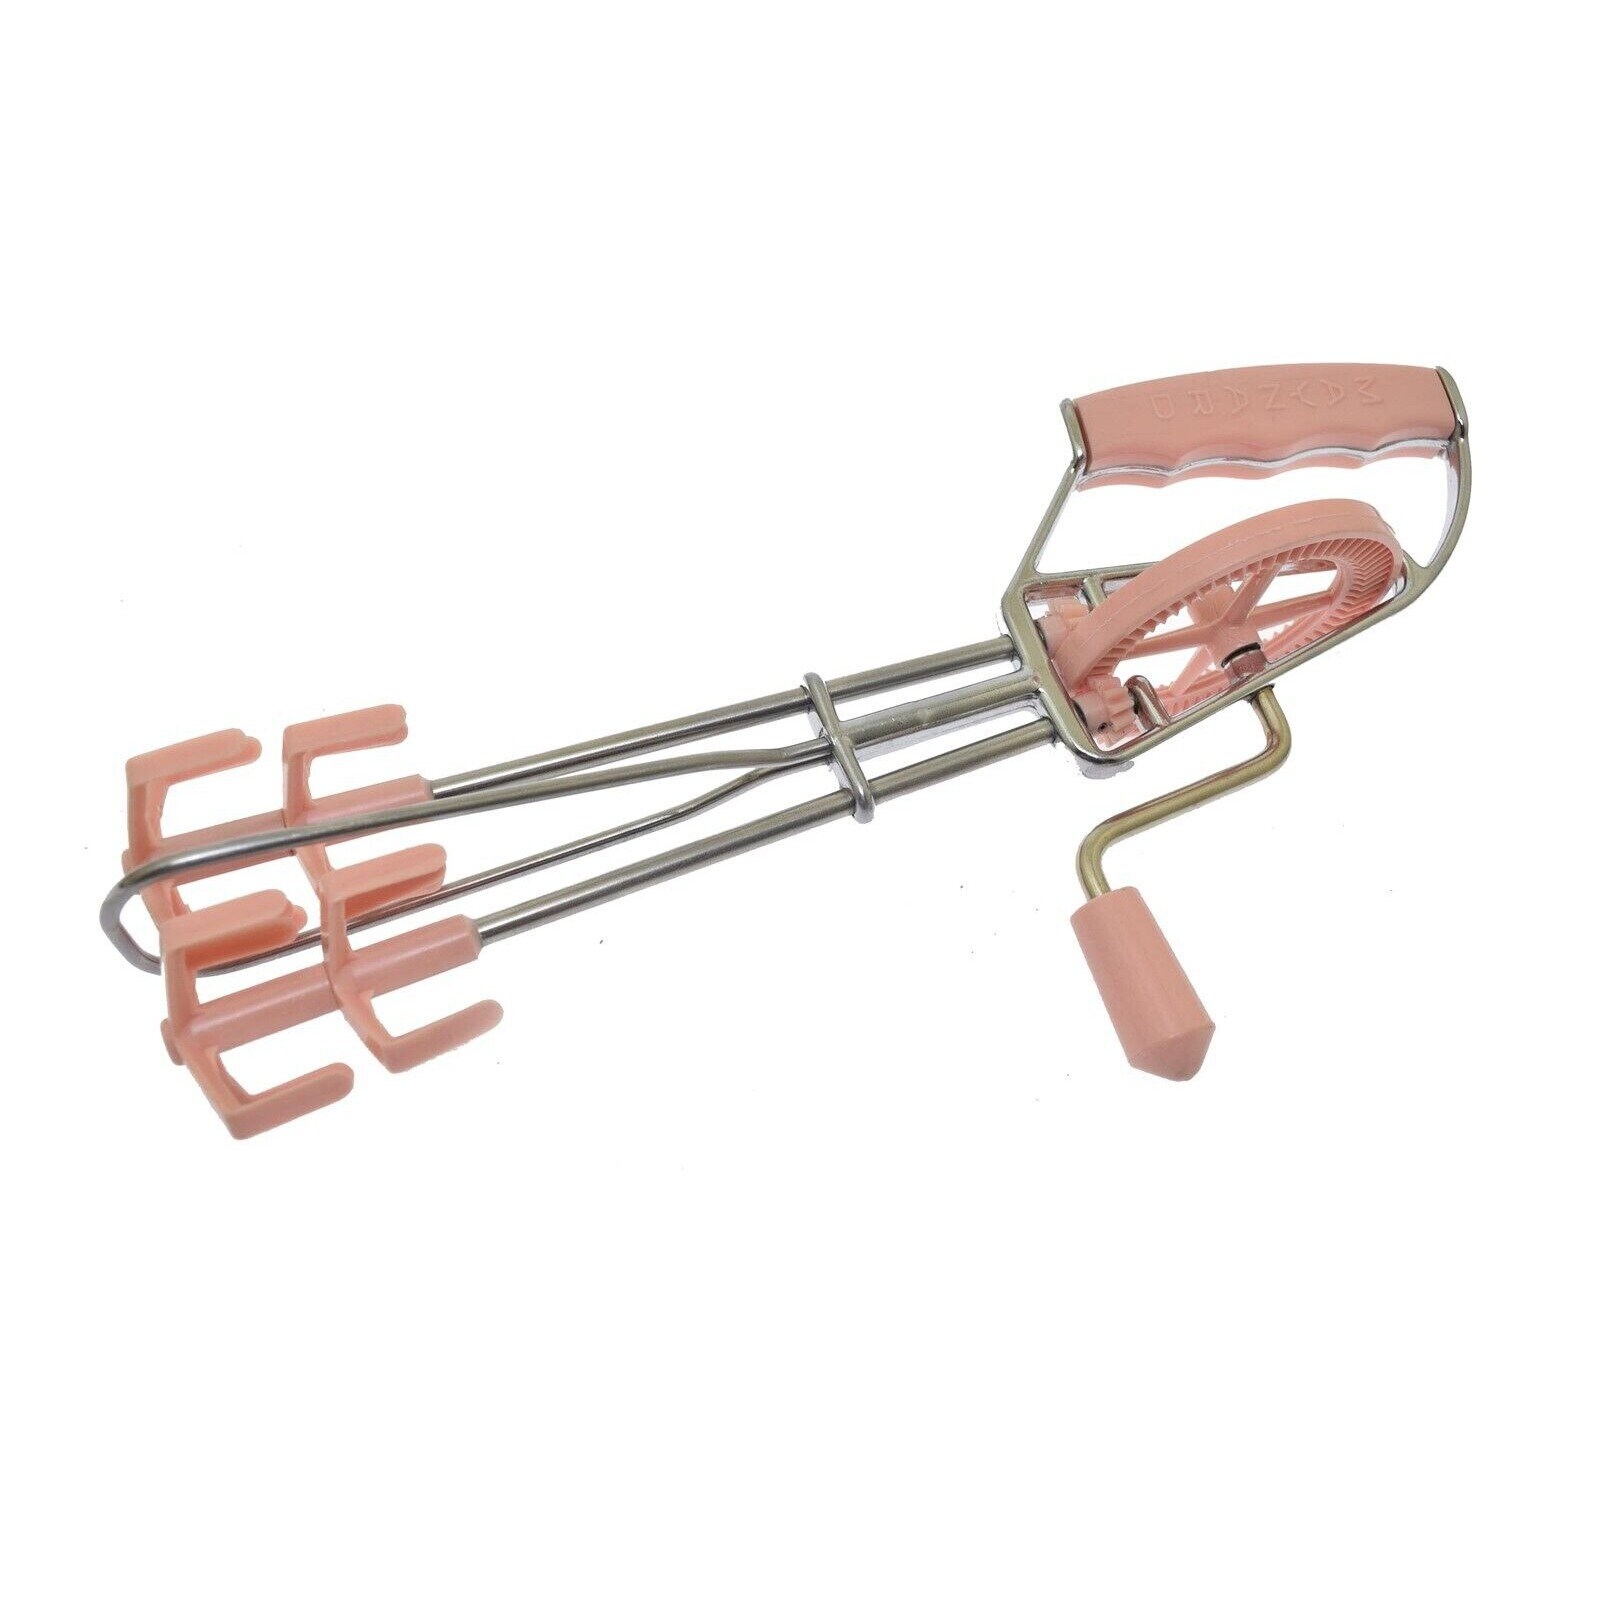 VINTAGE MAYNARD EGG BEATER HAND MIXER WITH PINK HANDLE CLASSIC